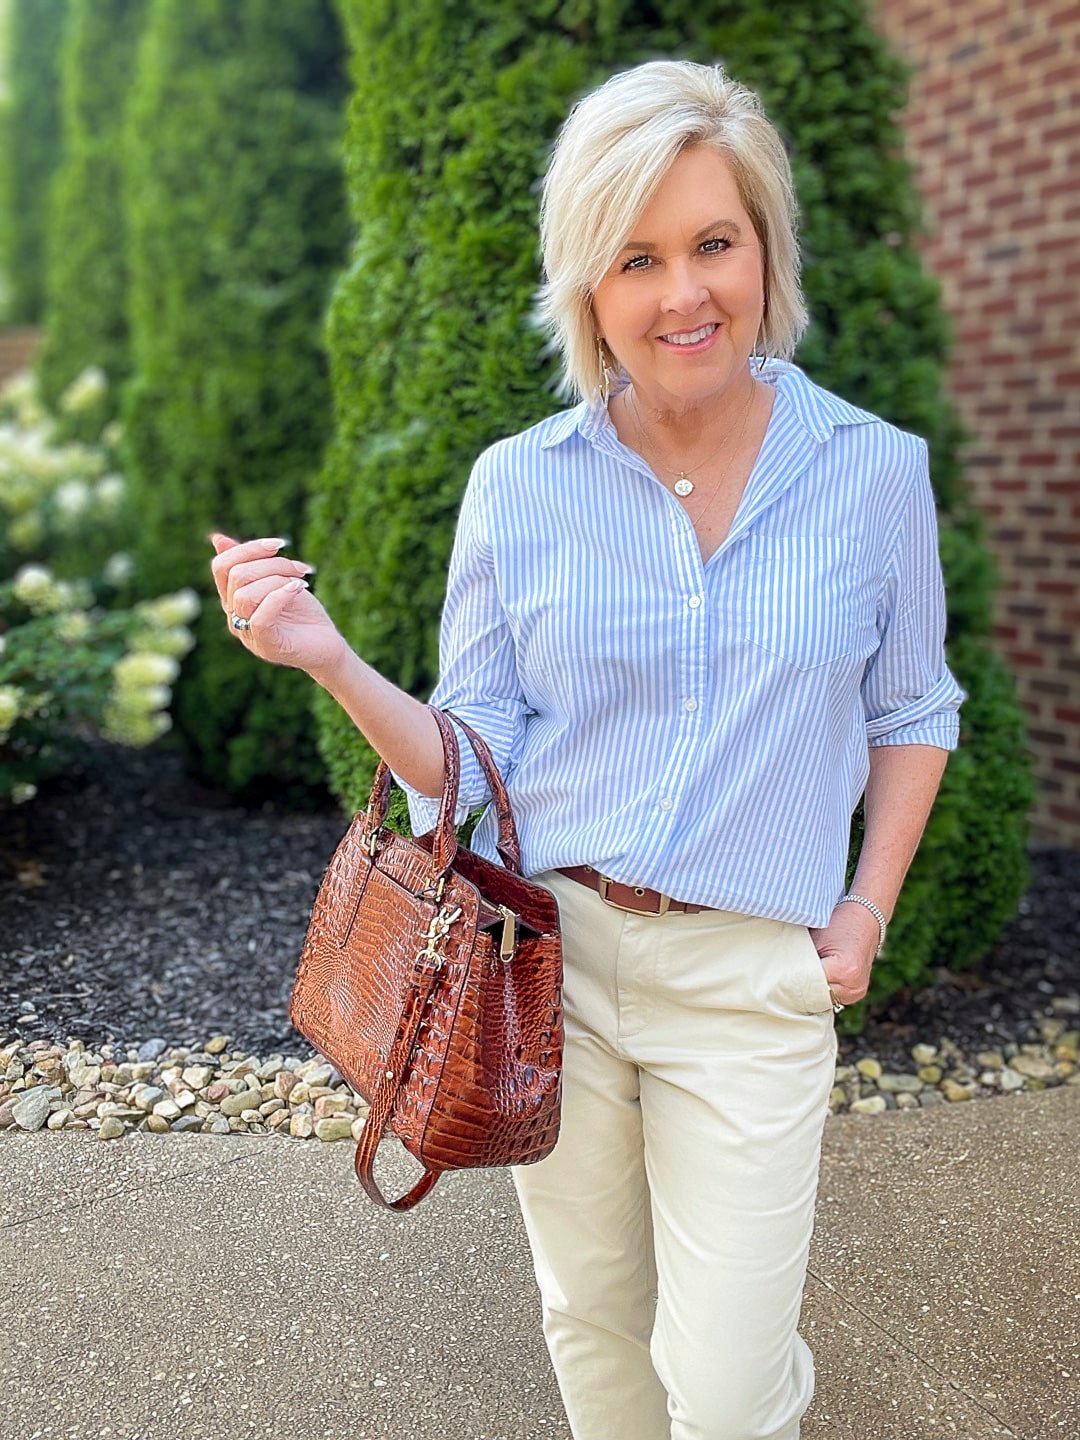 Over 40 Fashion Blogger, Tania Stephens is showing how to style Chinos and a striped shirt for summer9